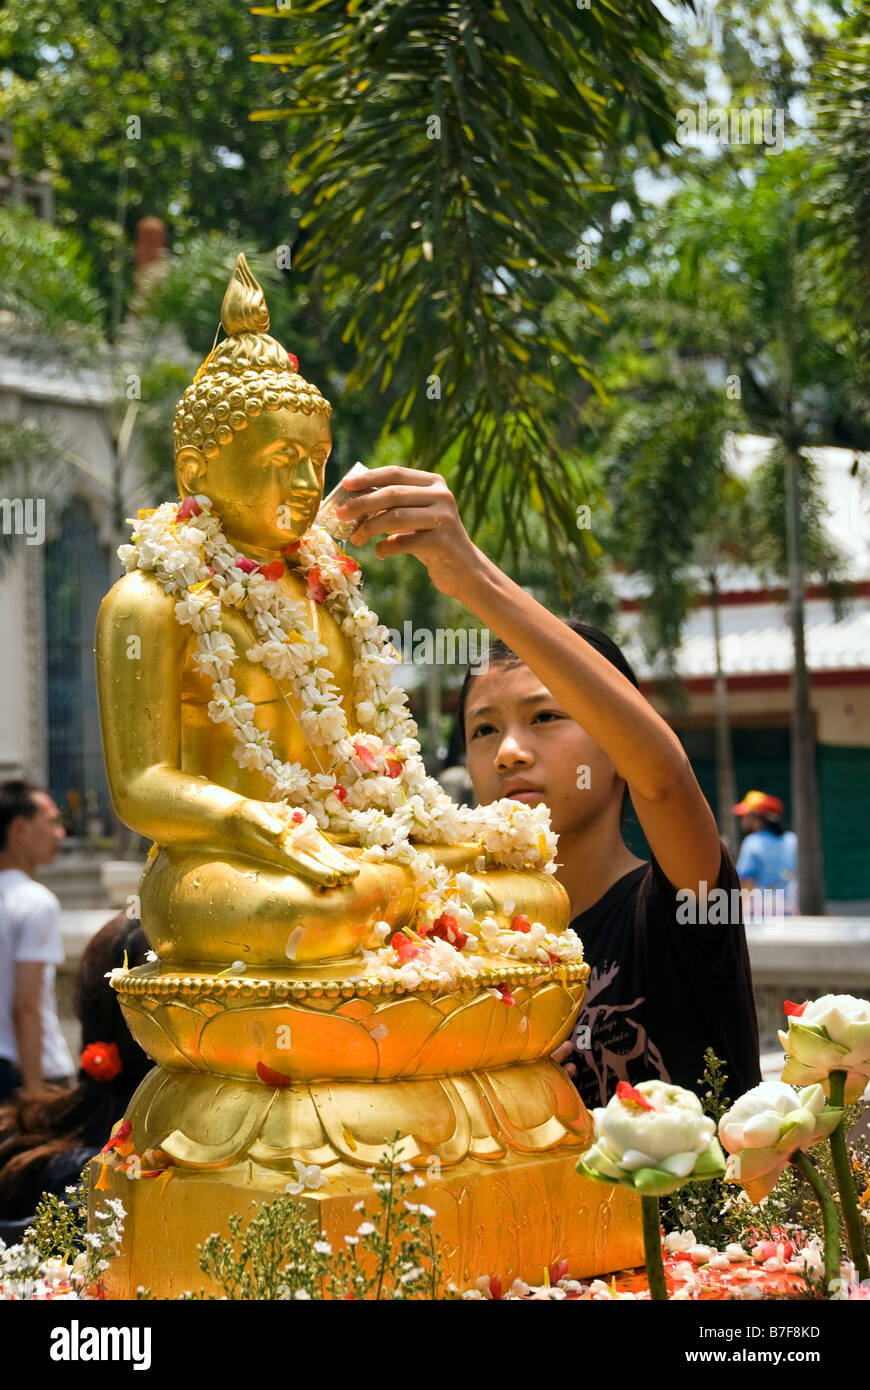 Young boy pours water over statue of Buddha during Thai new year celebrations of Songkran - Wat Bowan Niwet Bangkok Thailand Stock Photo